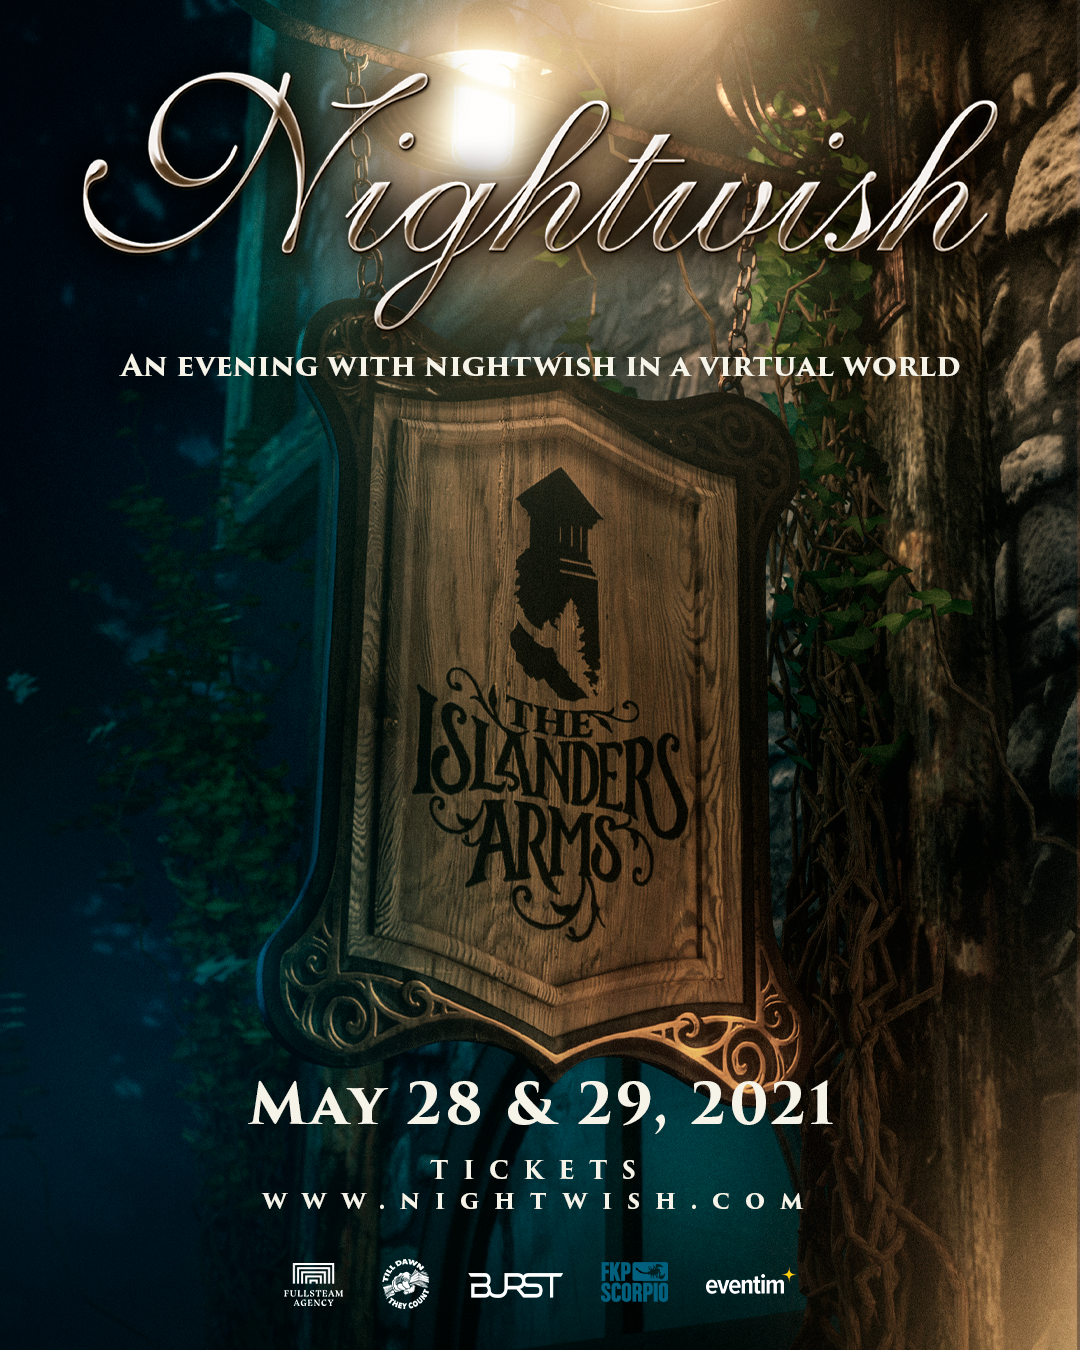 An Evening with Nightwish in a Virtual World